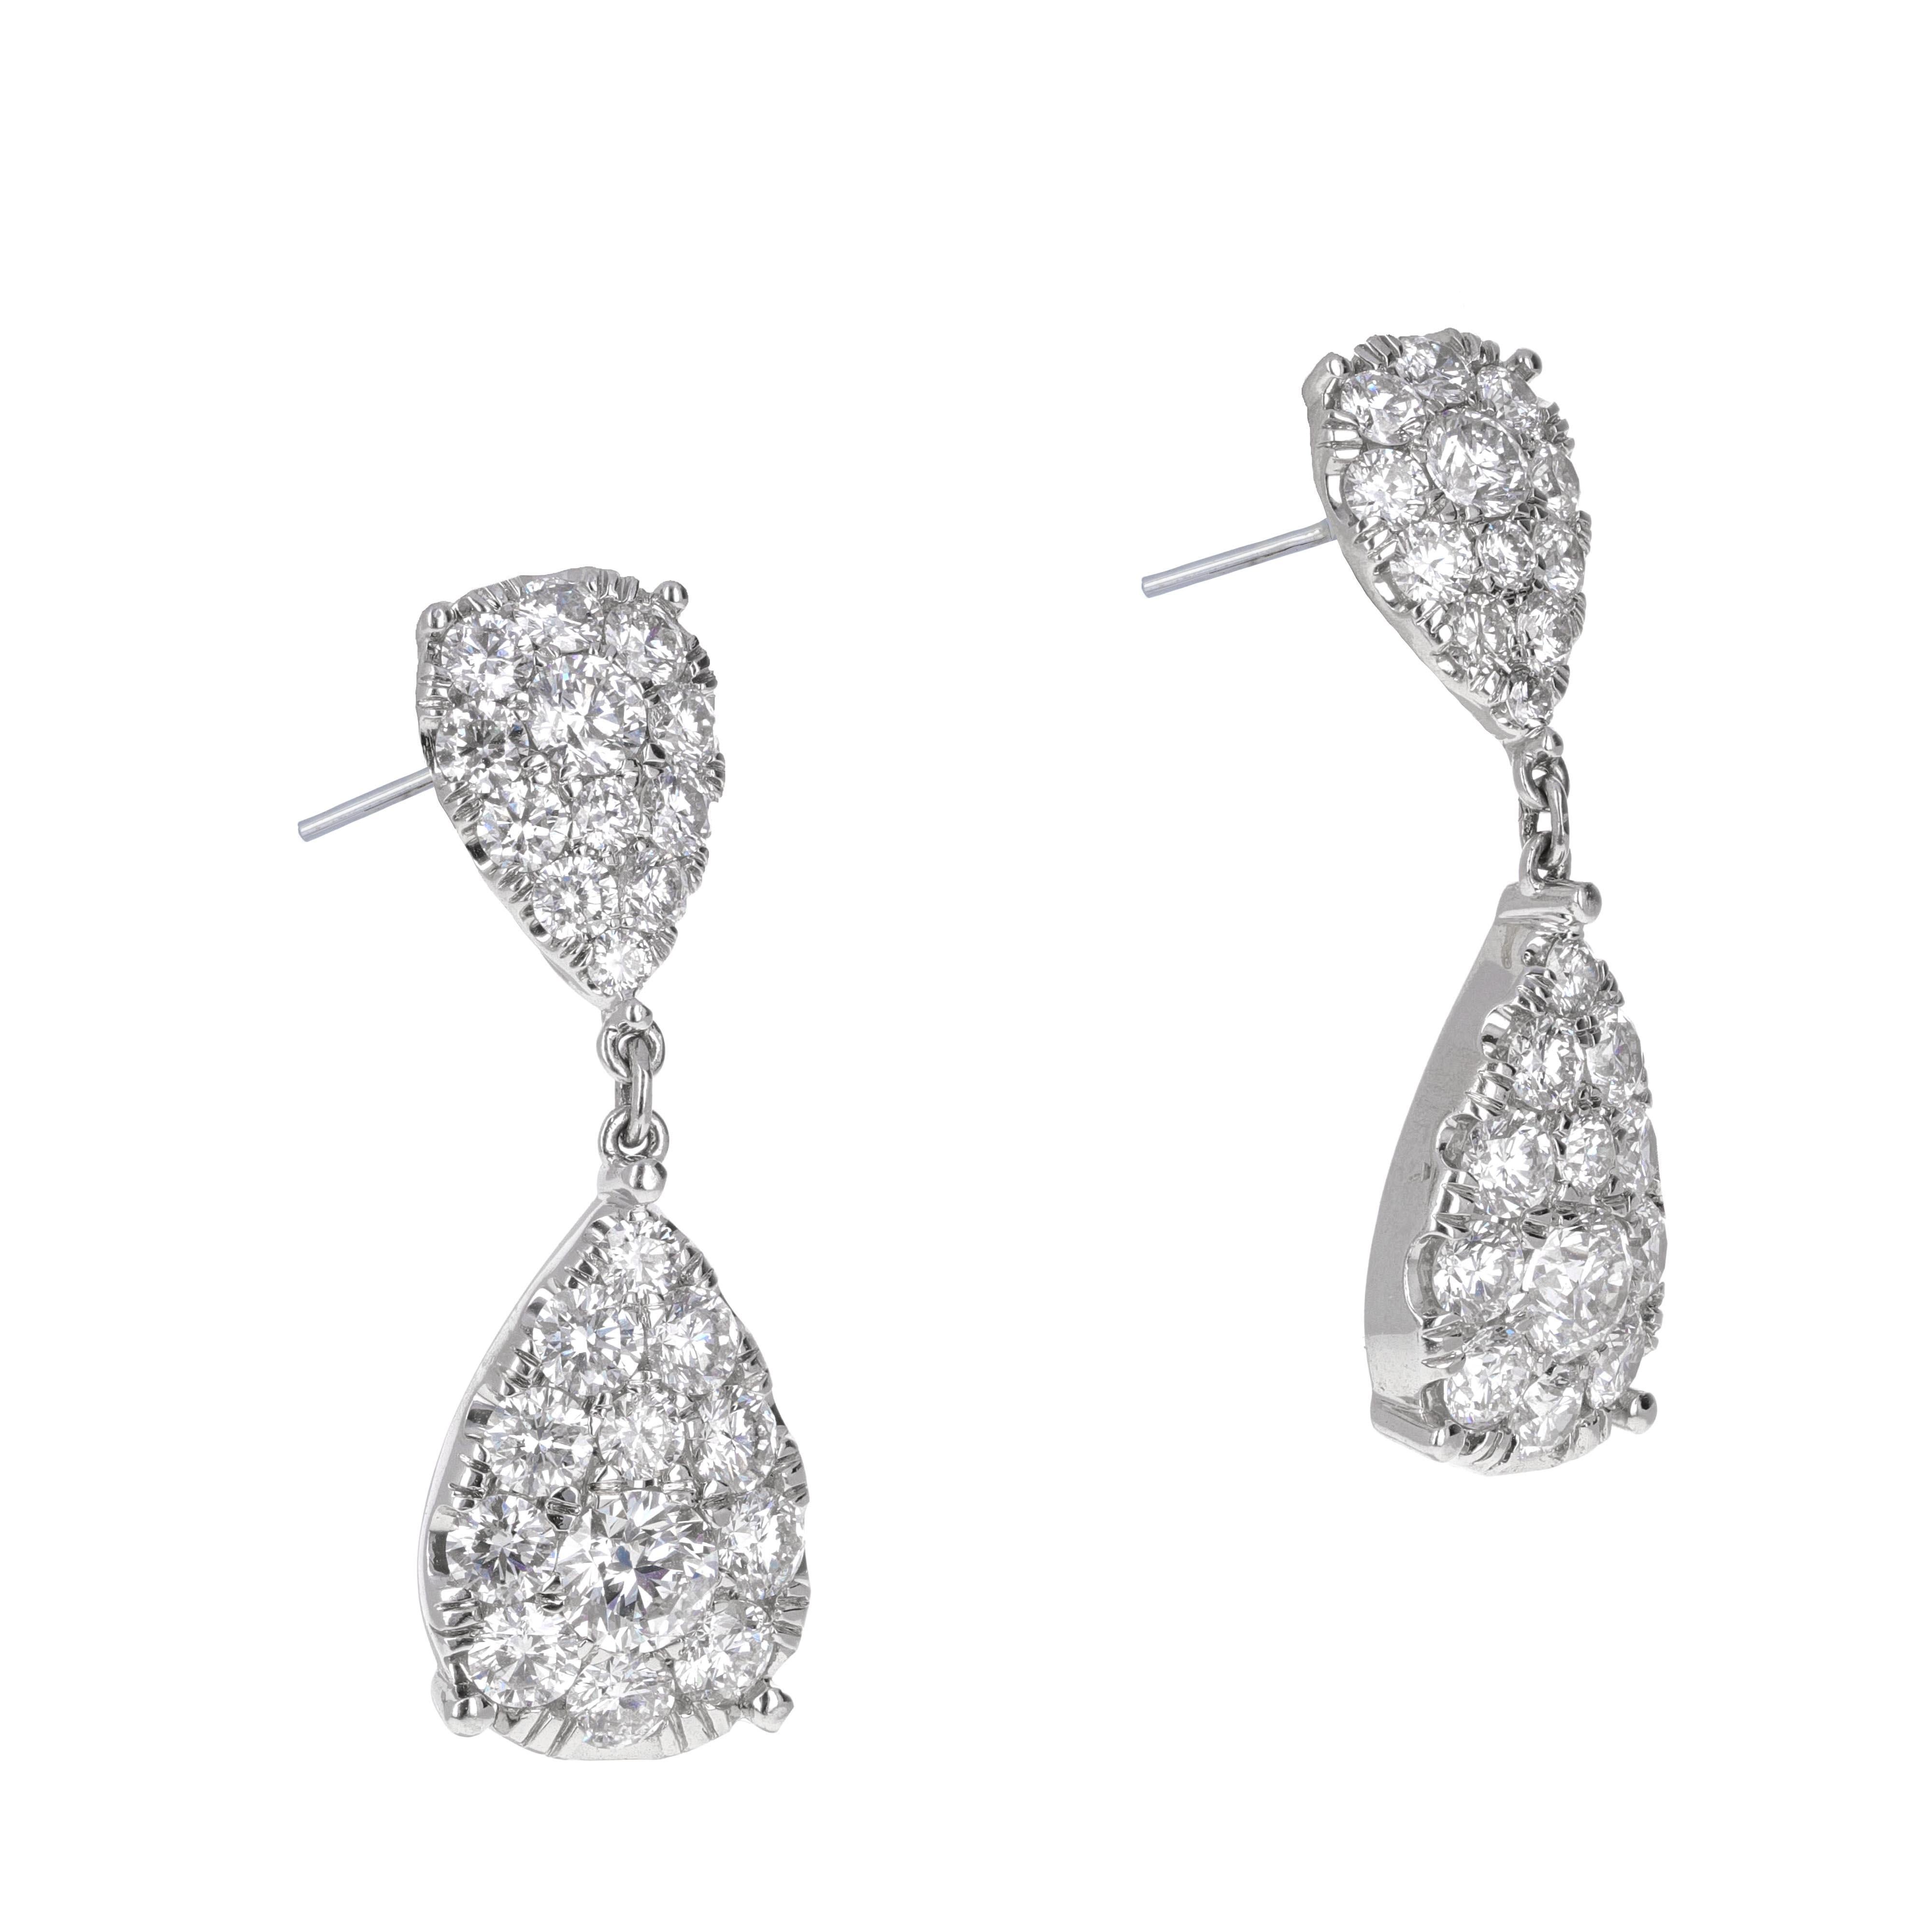 18 karat white gold diamond pear shape dangling earrings. The earrings are made up of smaller round diamonds and give the illusion of a larger stone.
There is a total of 5.98 carats in the earrings.